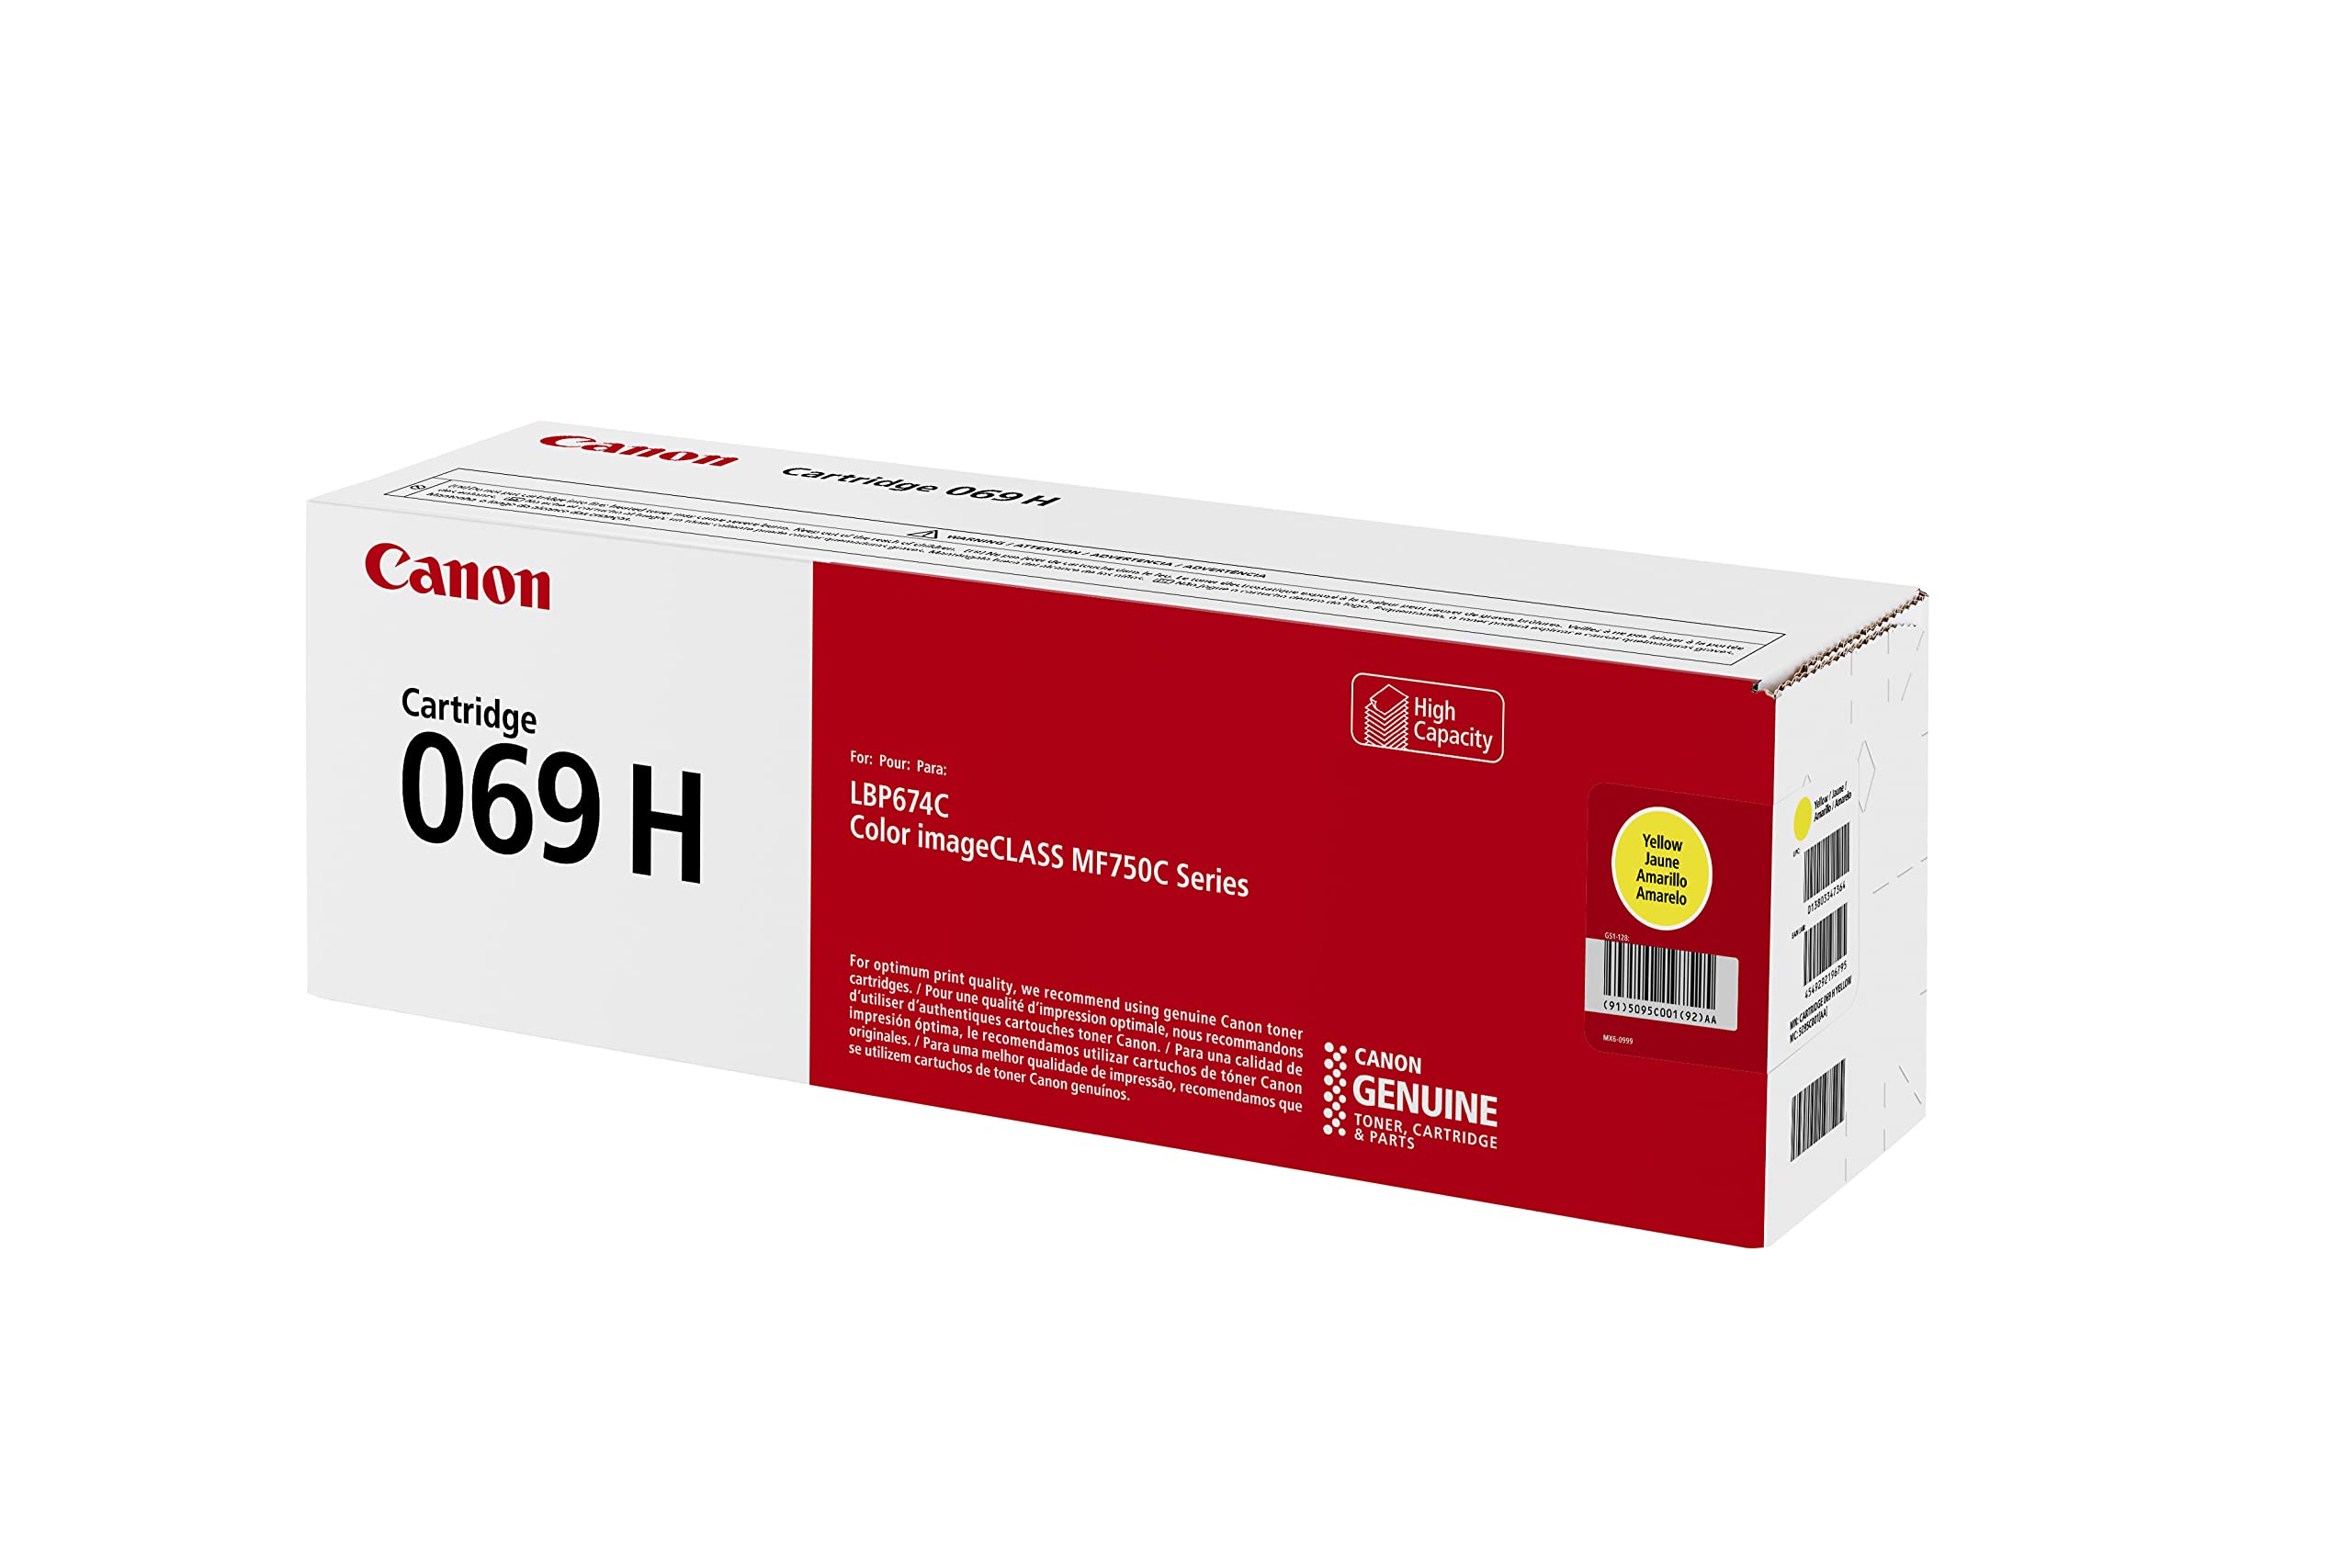 Canon 069 Yellow Toner Cartridge, High Capacity, Compatible to MF753Cdw, MF751Cdw and LBP674Cdw Printers